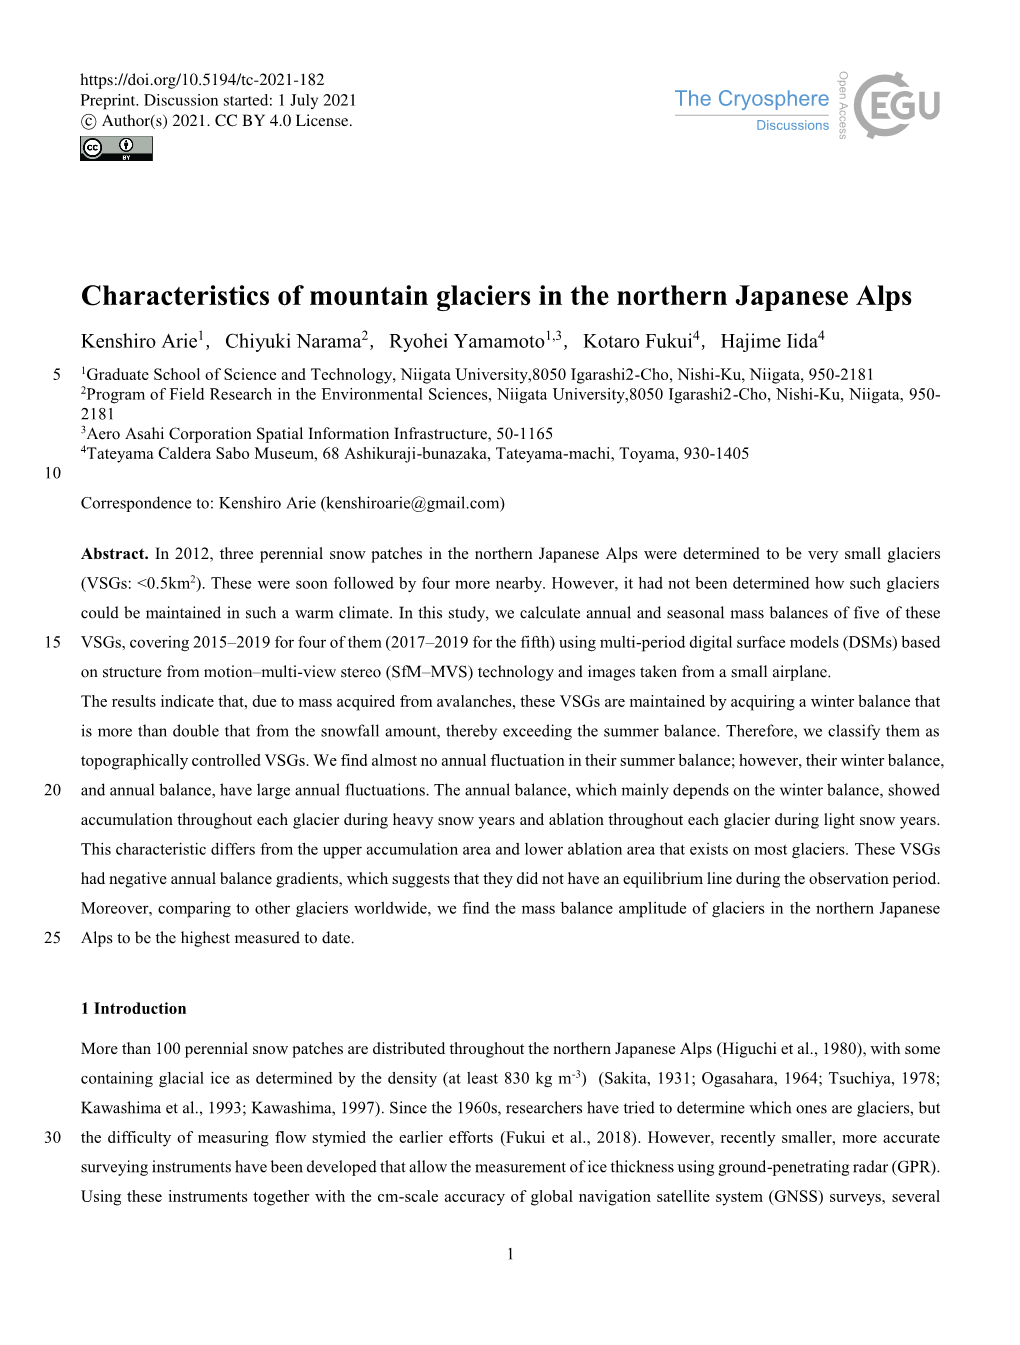 Characteristics of Mountain Glaciers in the Northern Japanese Alps